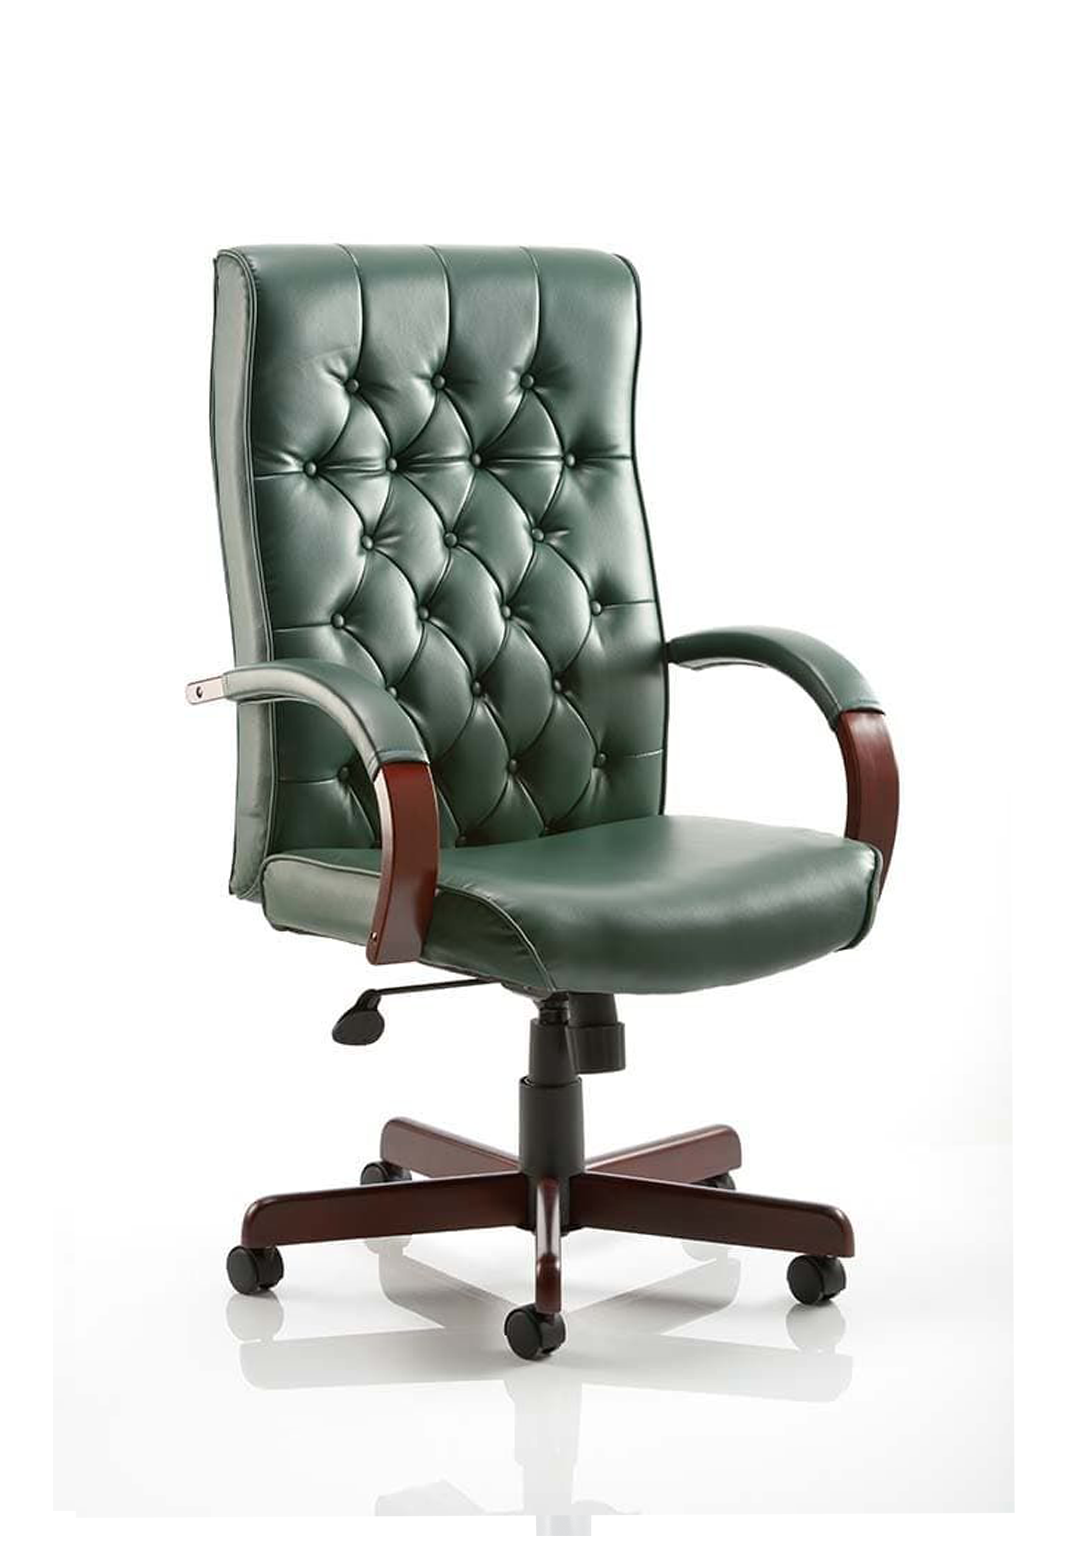 Chesterfield Leather Executive Chair